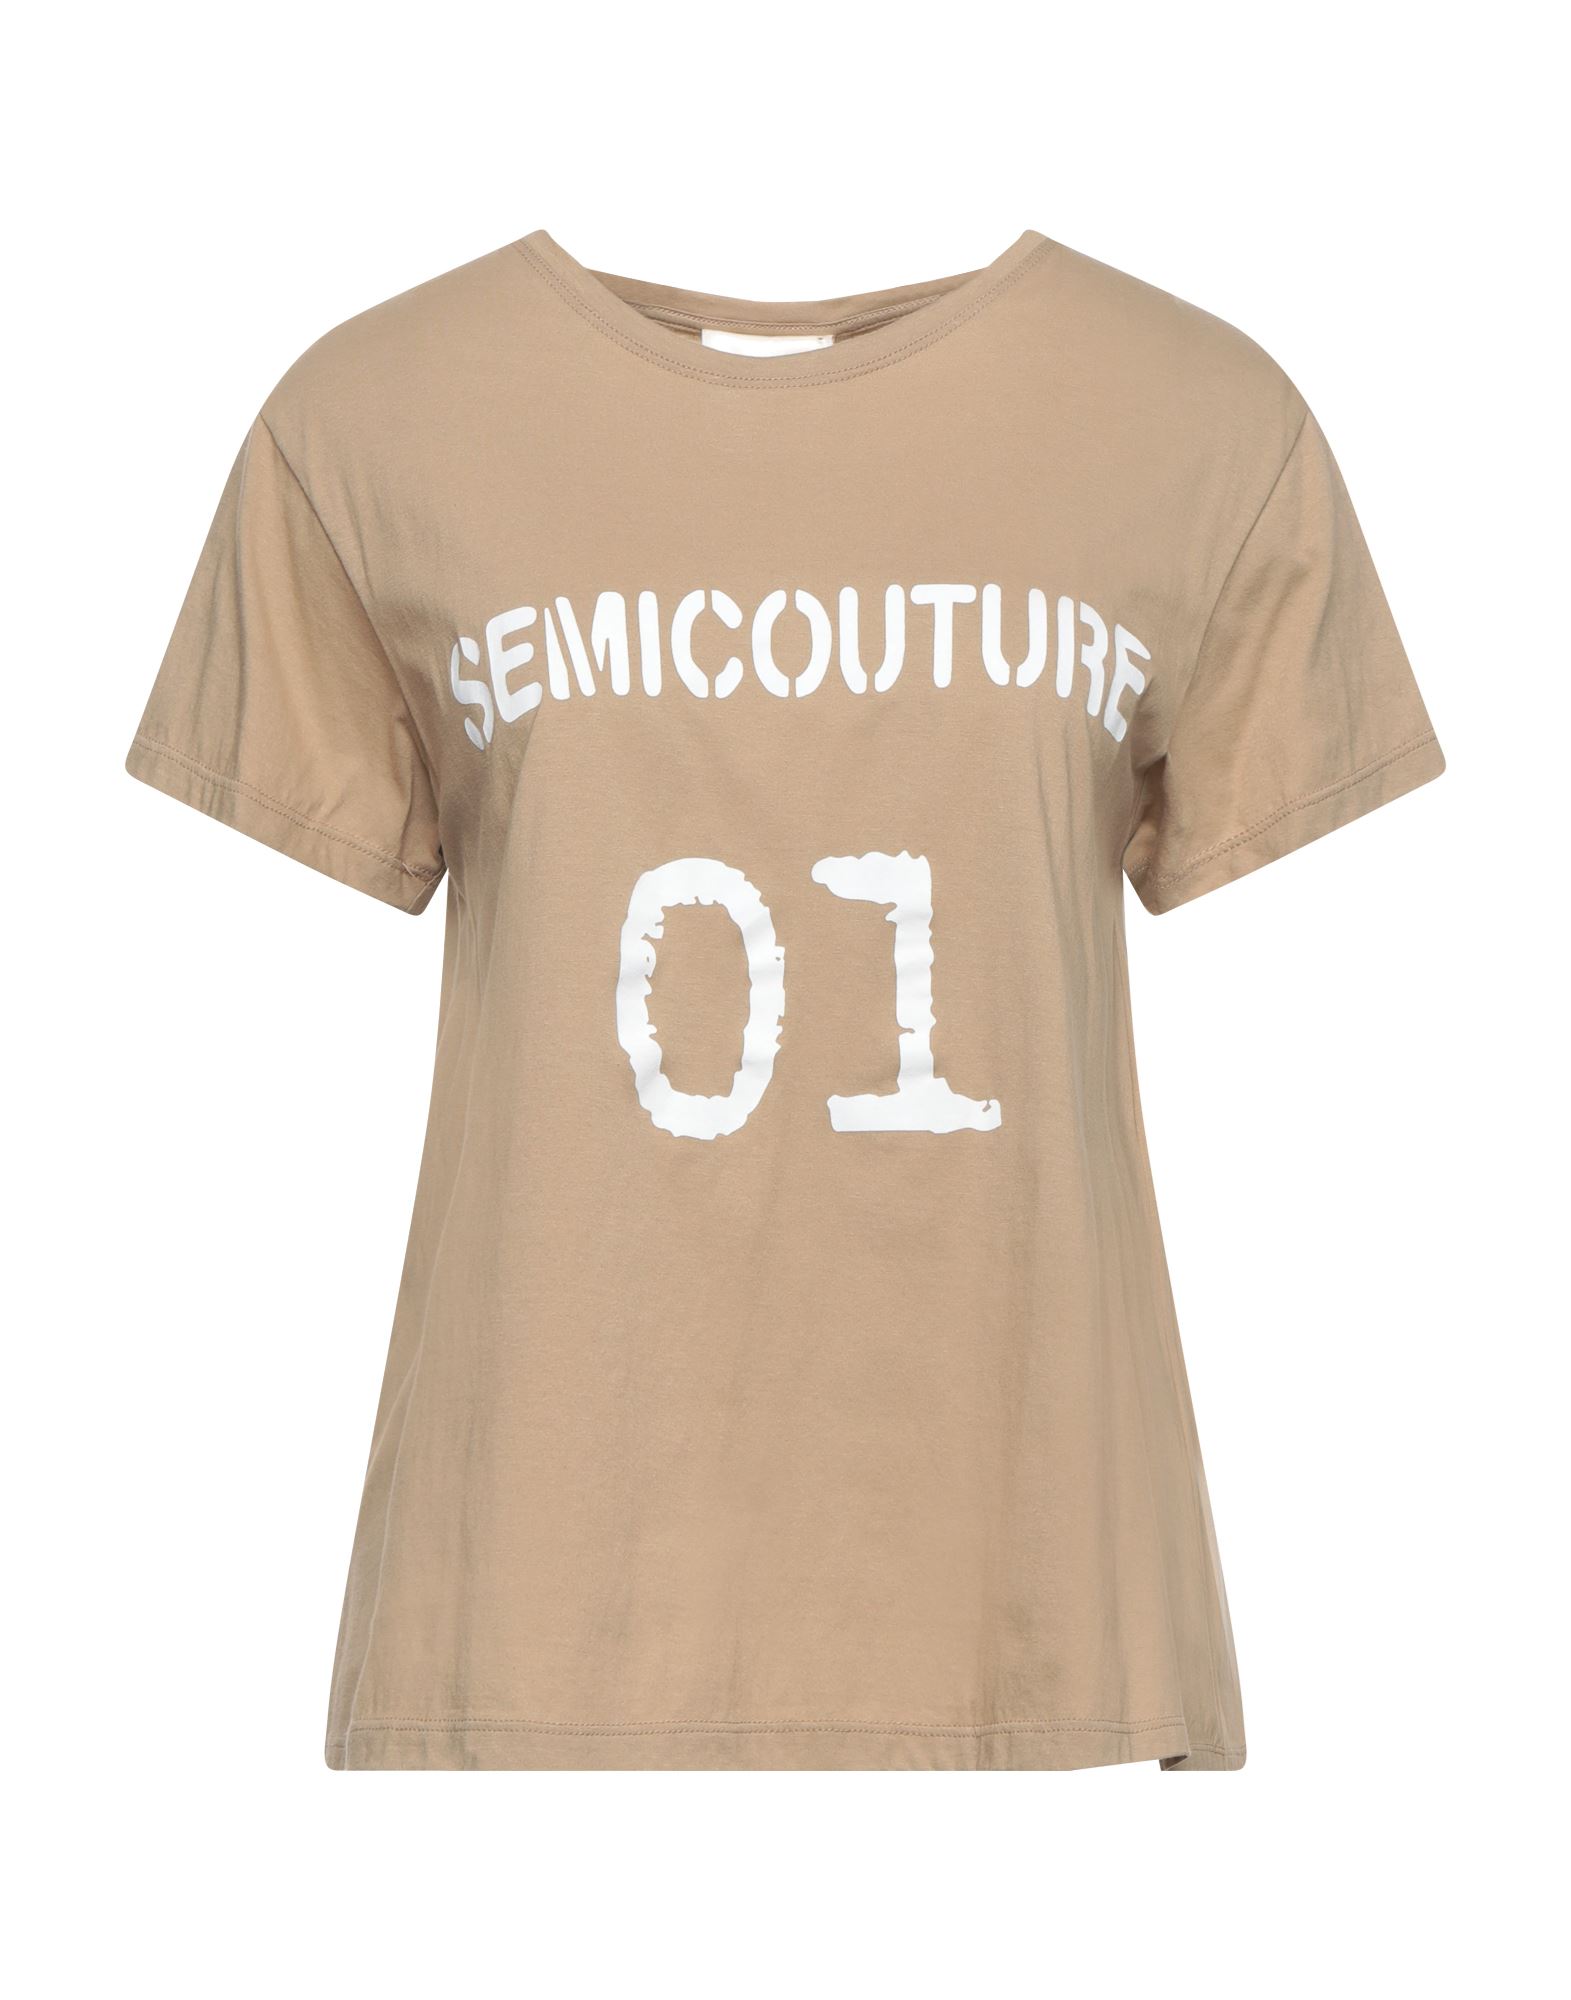 Semicouture T-shirts In Camel